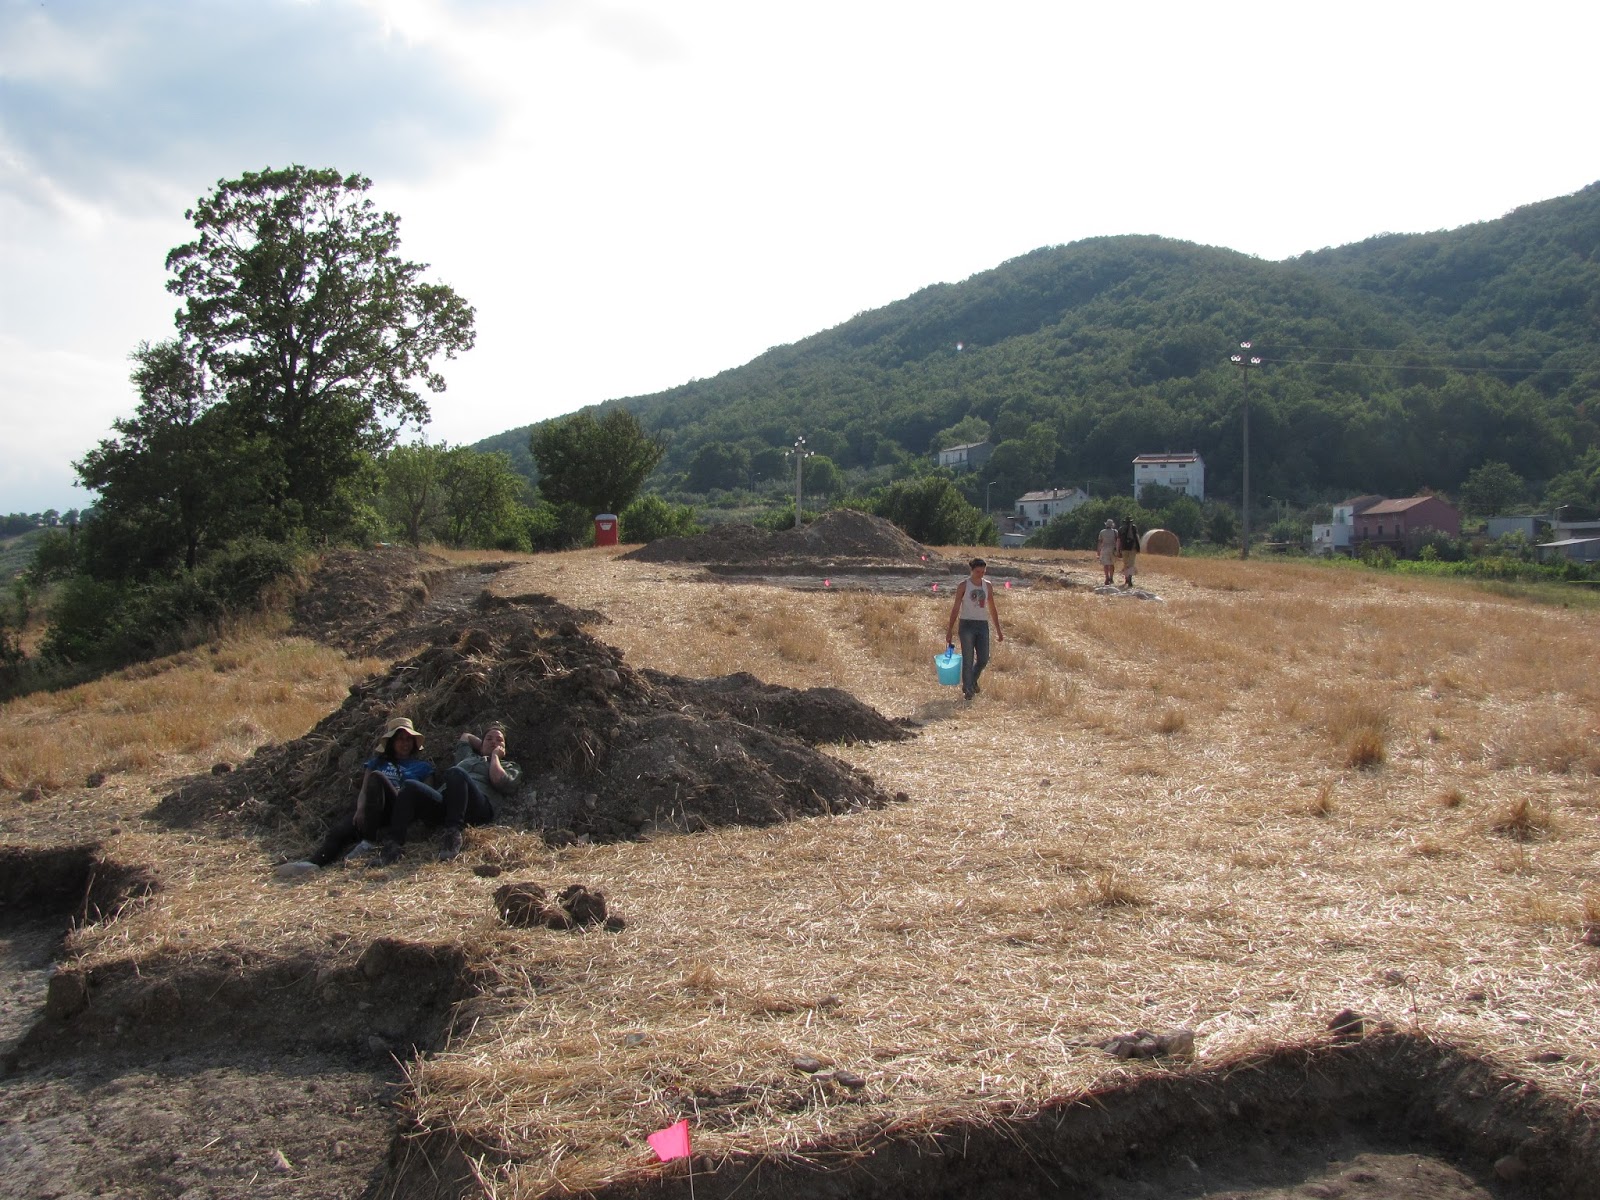 On a hillside, two people rest against a pile of dirt while another carries a bucket. A wide, shallow area is dug out.